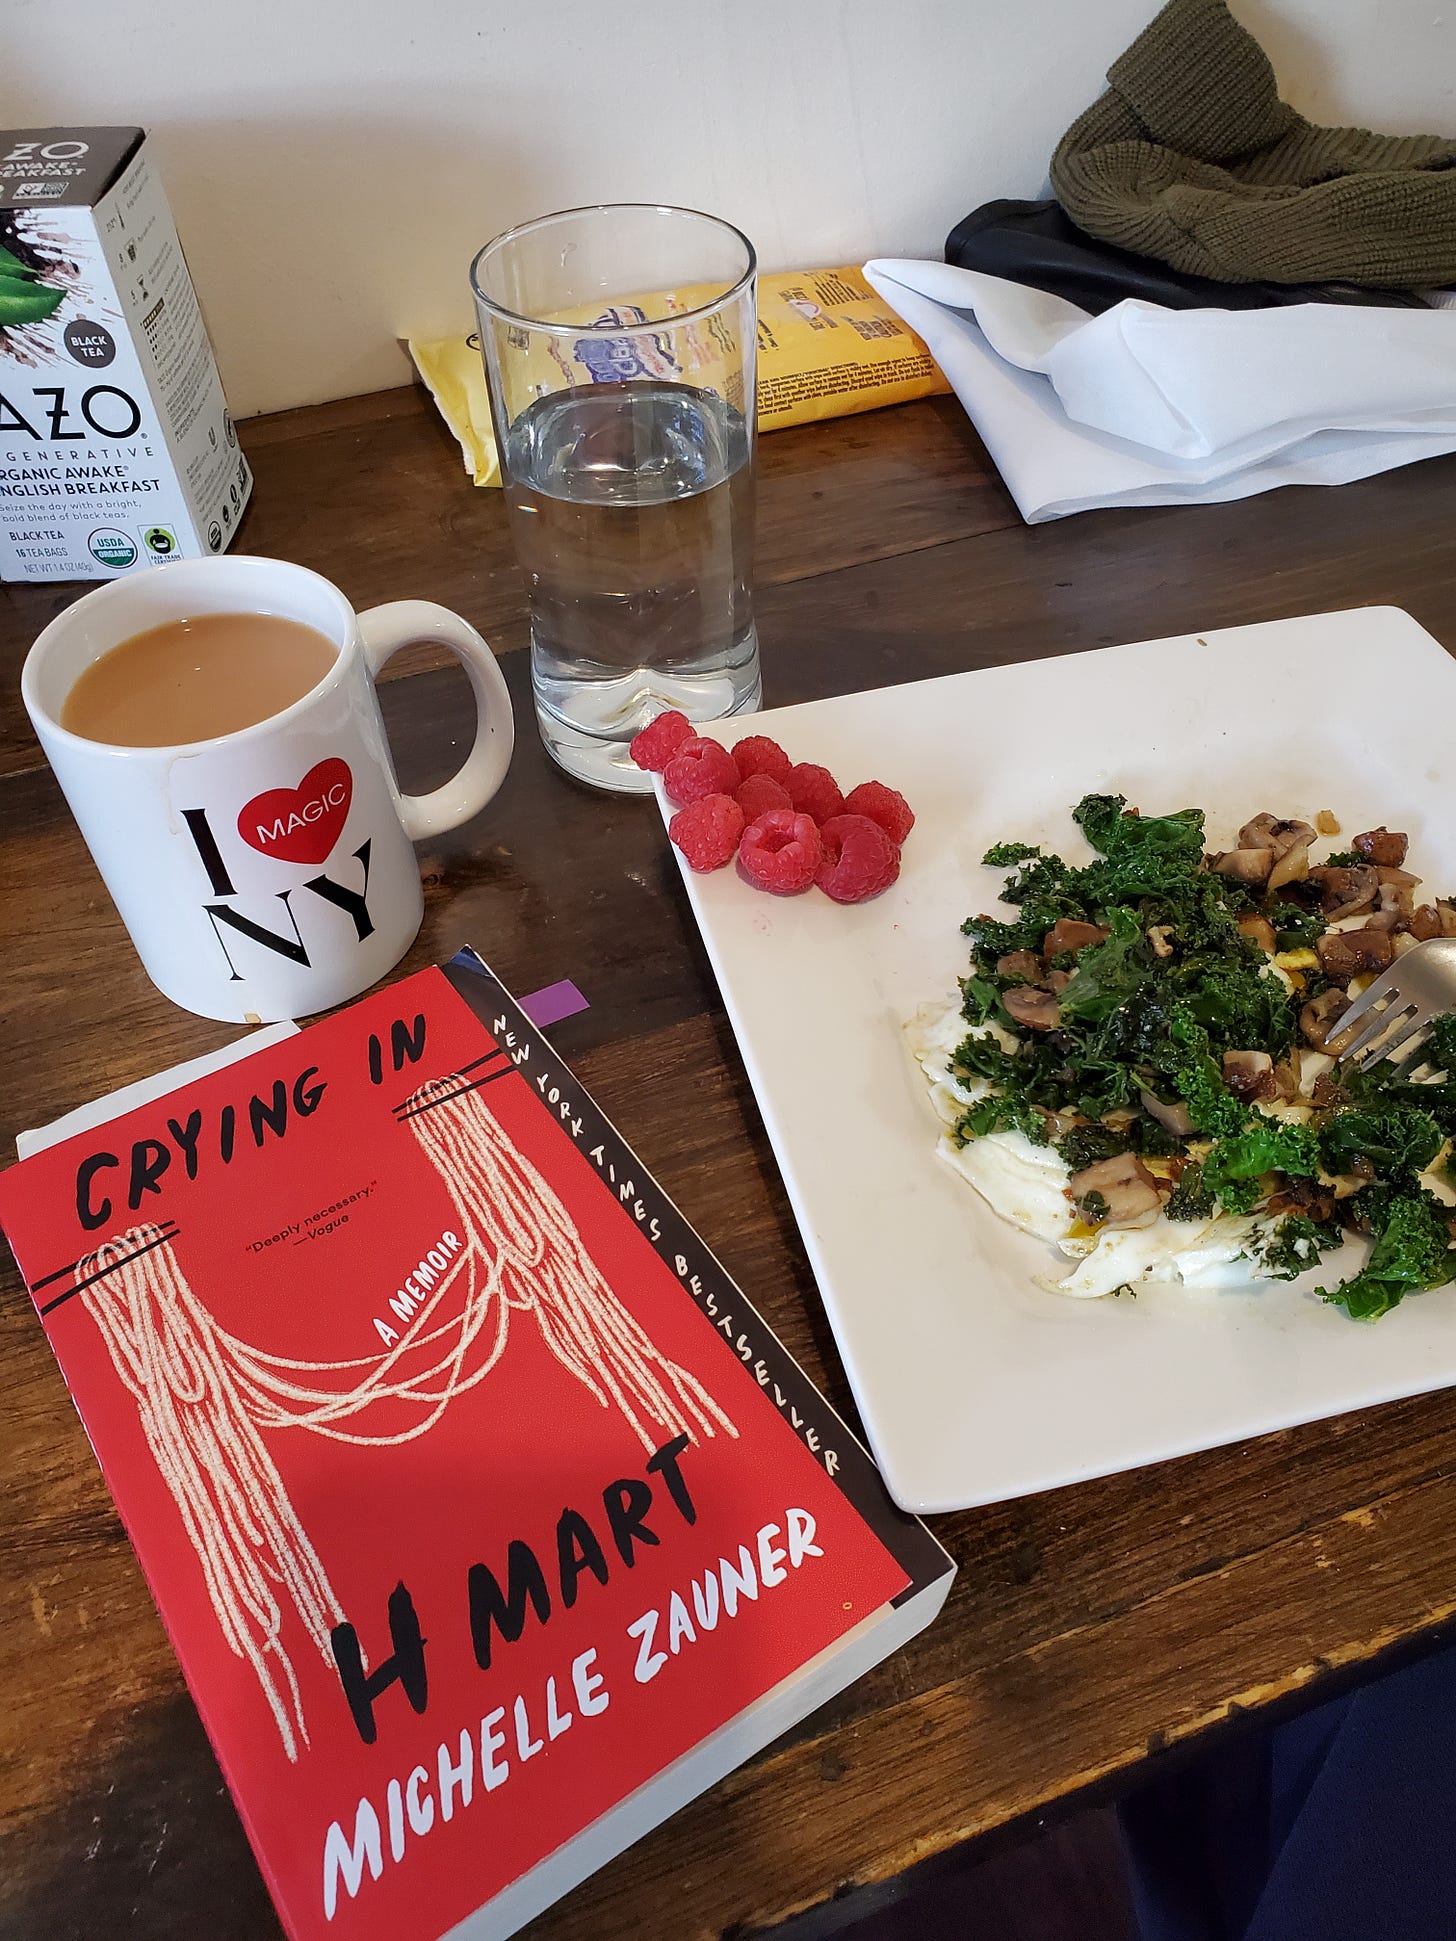 A breakfast scene shows the "Crying in H Mart" book next to a plate of eggs and greens, a cup of tea, and various other items.